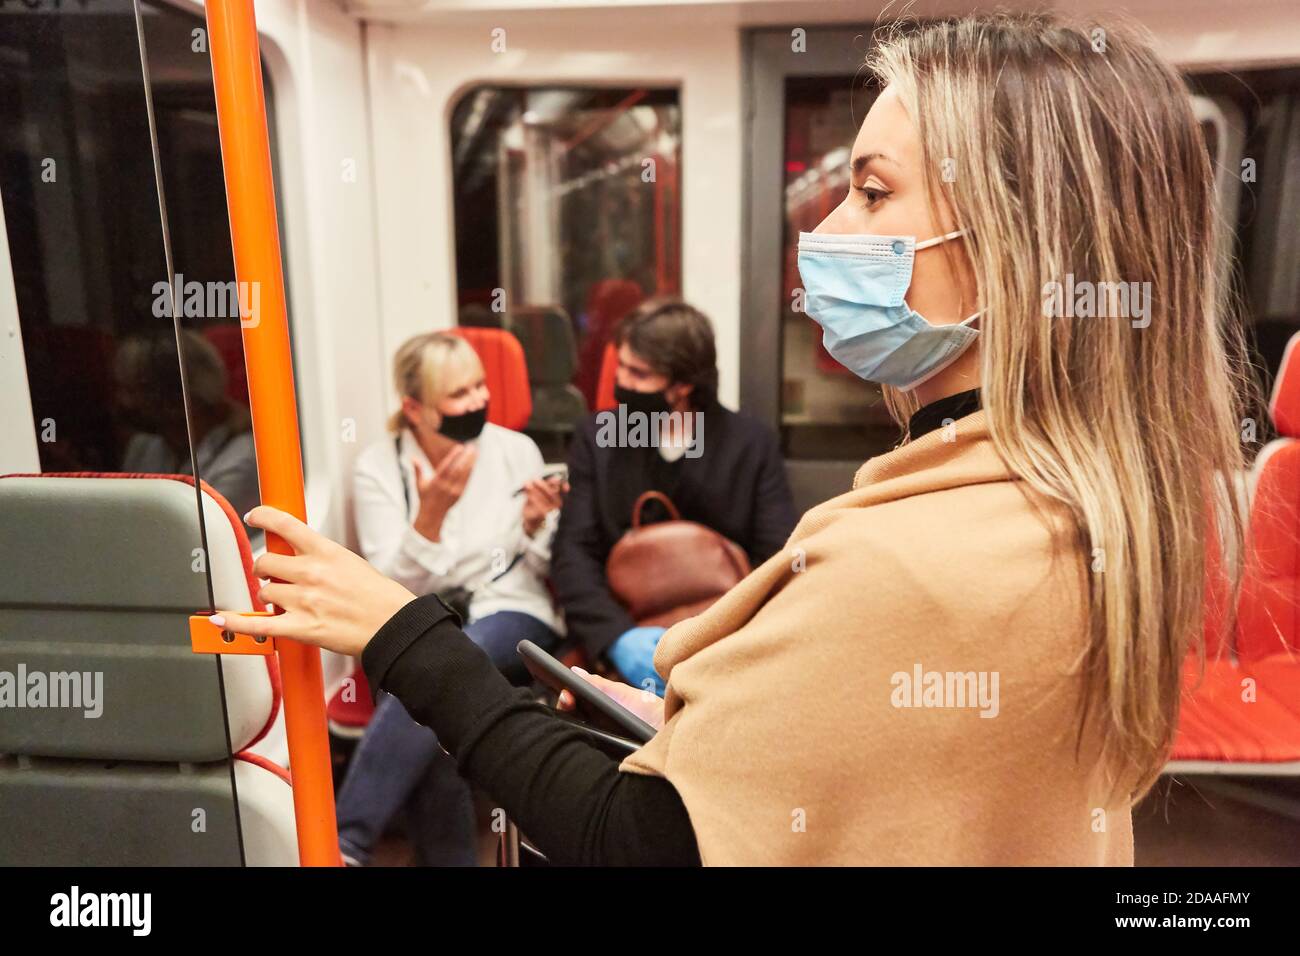 Woman as a passenger with face mask due to the Covid-19 pandemic in local public transport Stock Photo